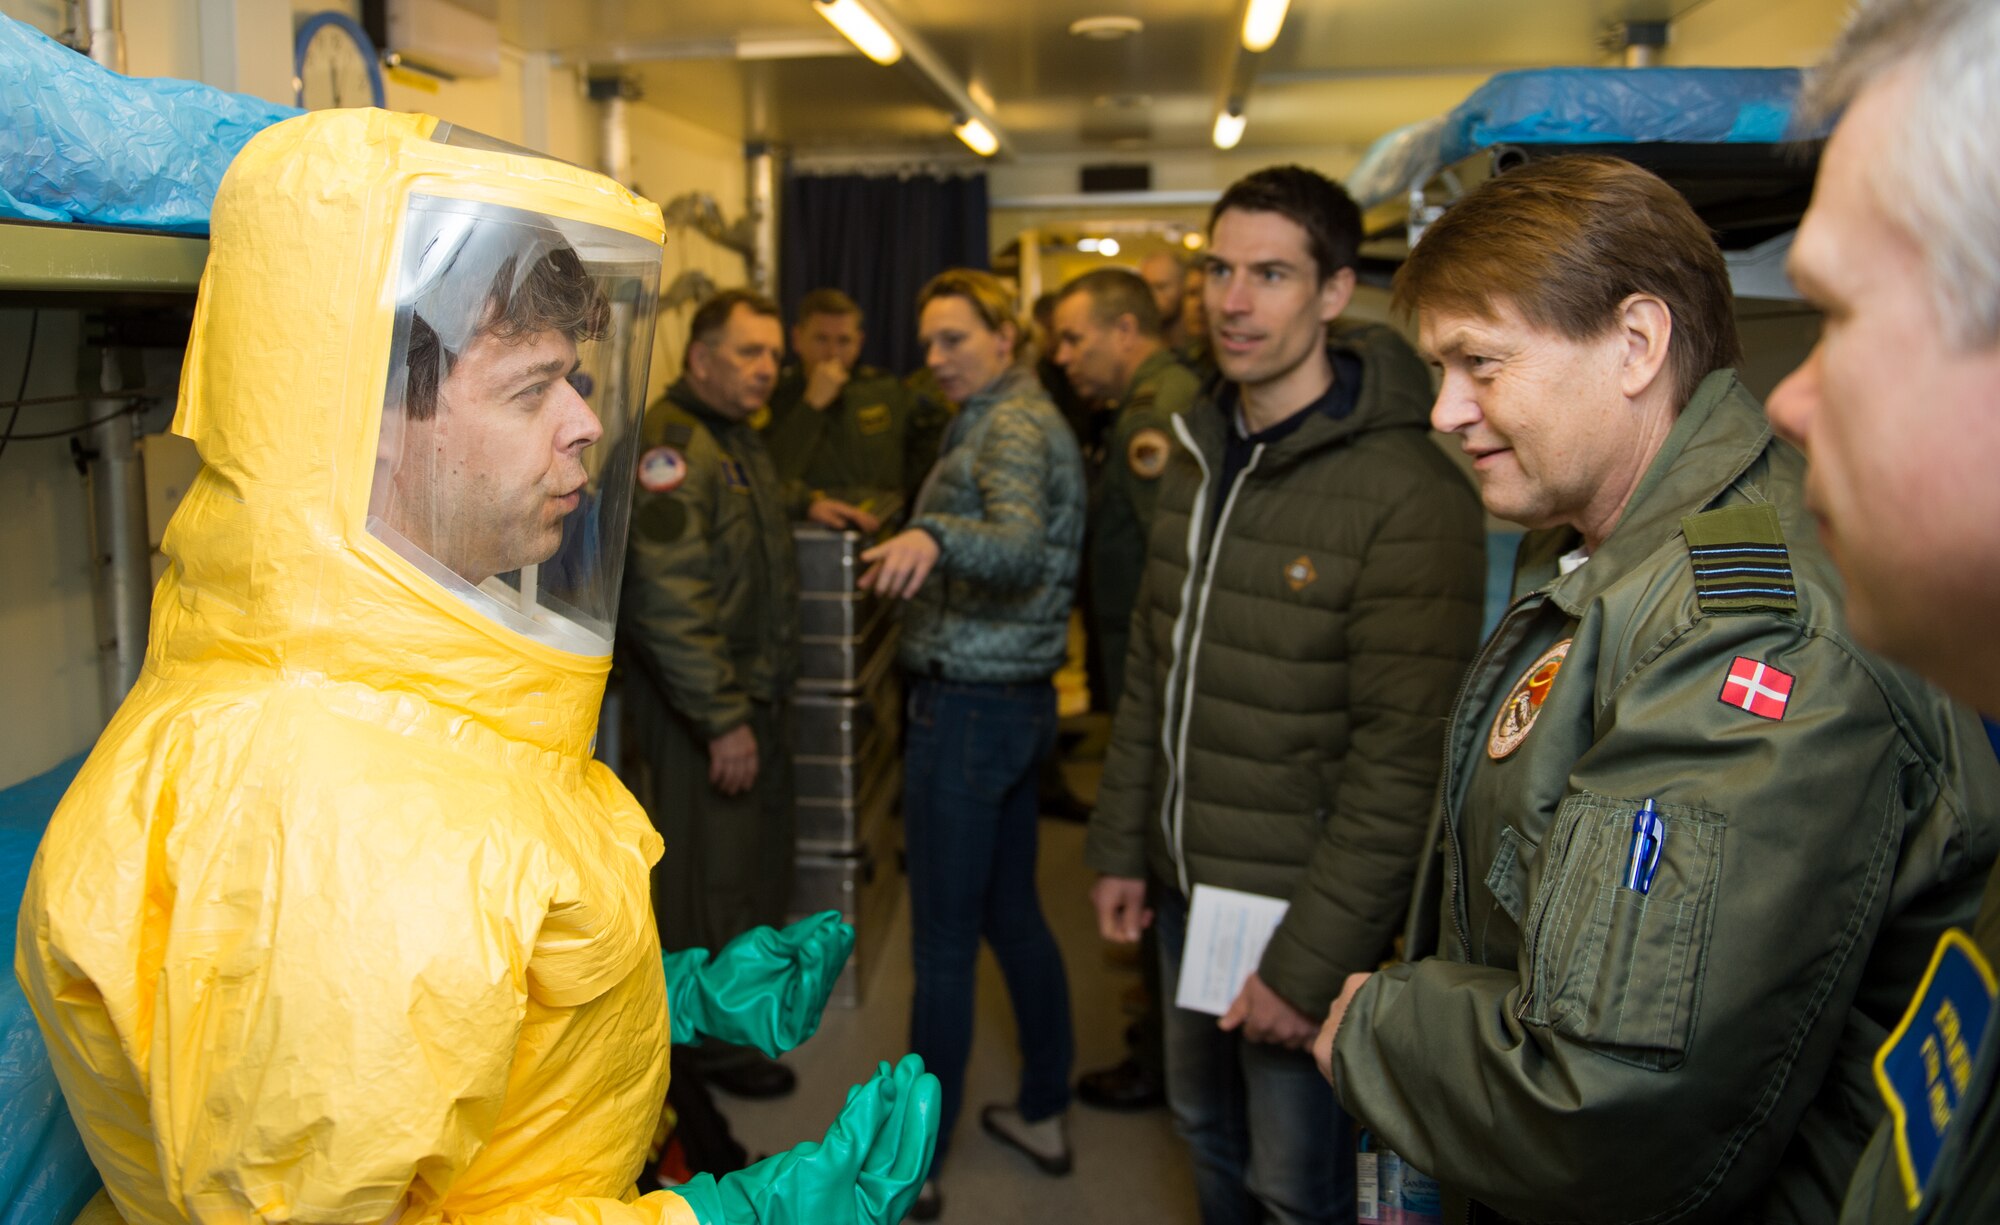 Two Royal Danish air force airmen discuss the aeromedical evacuation unit during a tour they gave to over 200 aerospace medicine professionals at Ramstein Air Base, Germany, March 11, 2015. The Danish and 18 other nations participated in the 30th Ramstein Aerospace Medicine Summit and NATO Science and Technology Organization Technical Course. (U.S. Air Force photo/Staff Sgt. Armando A. Schwier-Morales) 